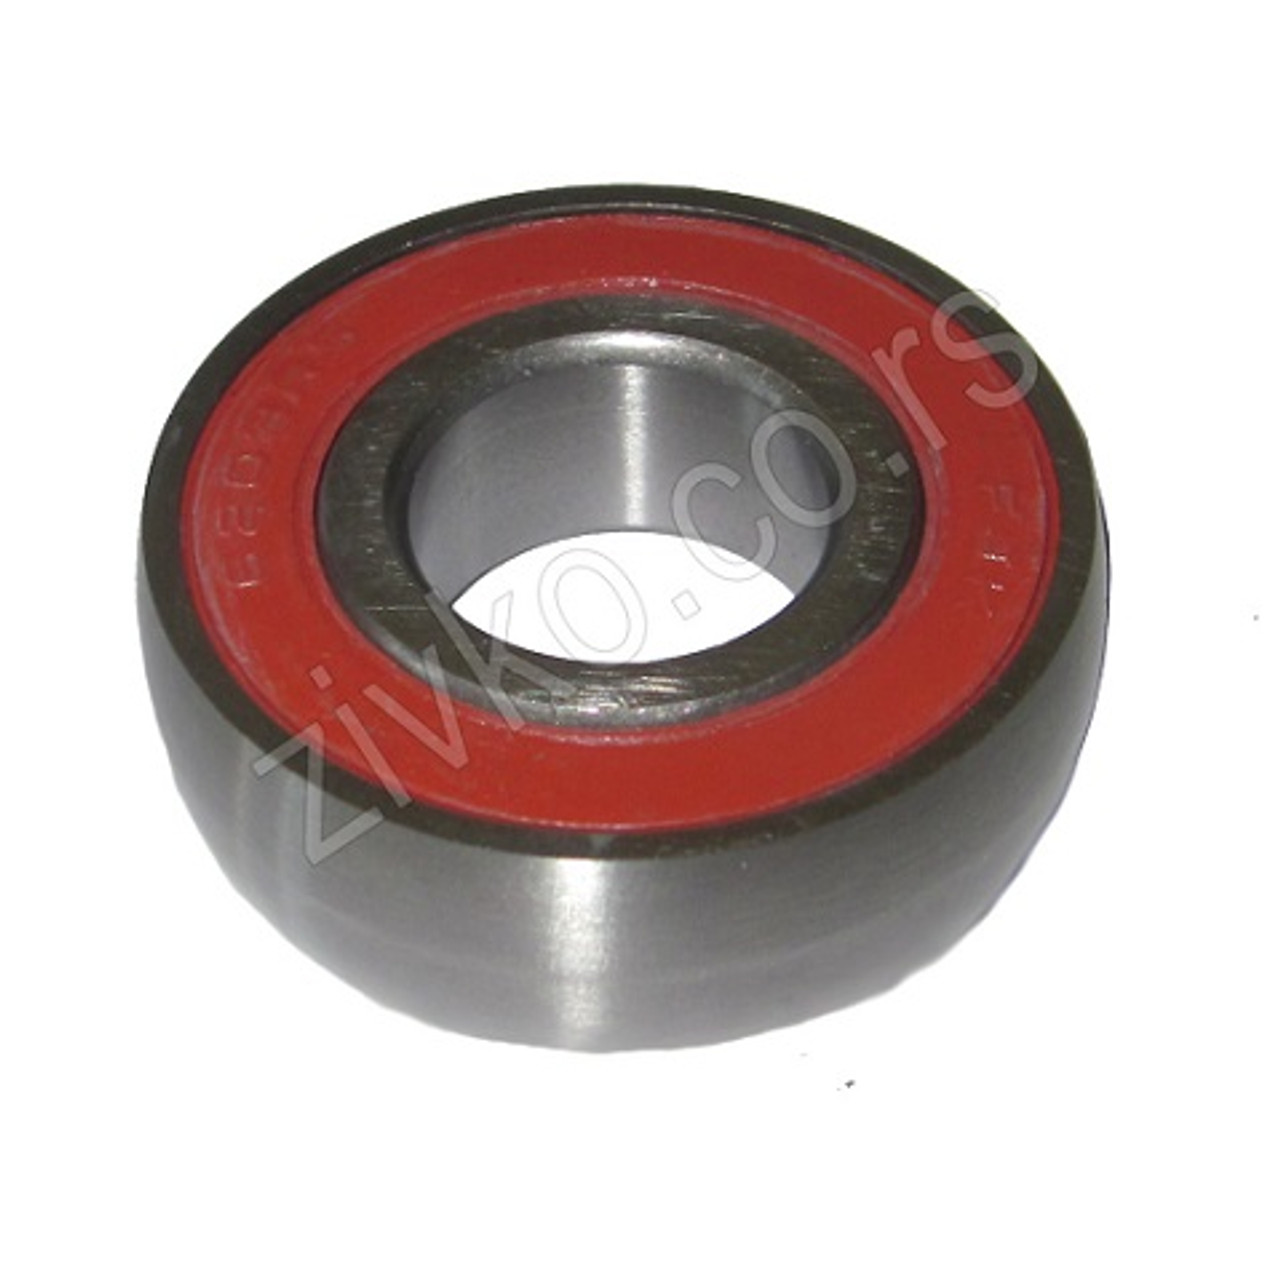 Insert ball bearing 6203 2RS EES - 2